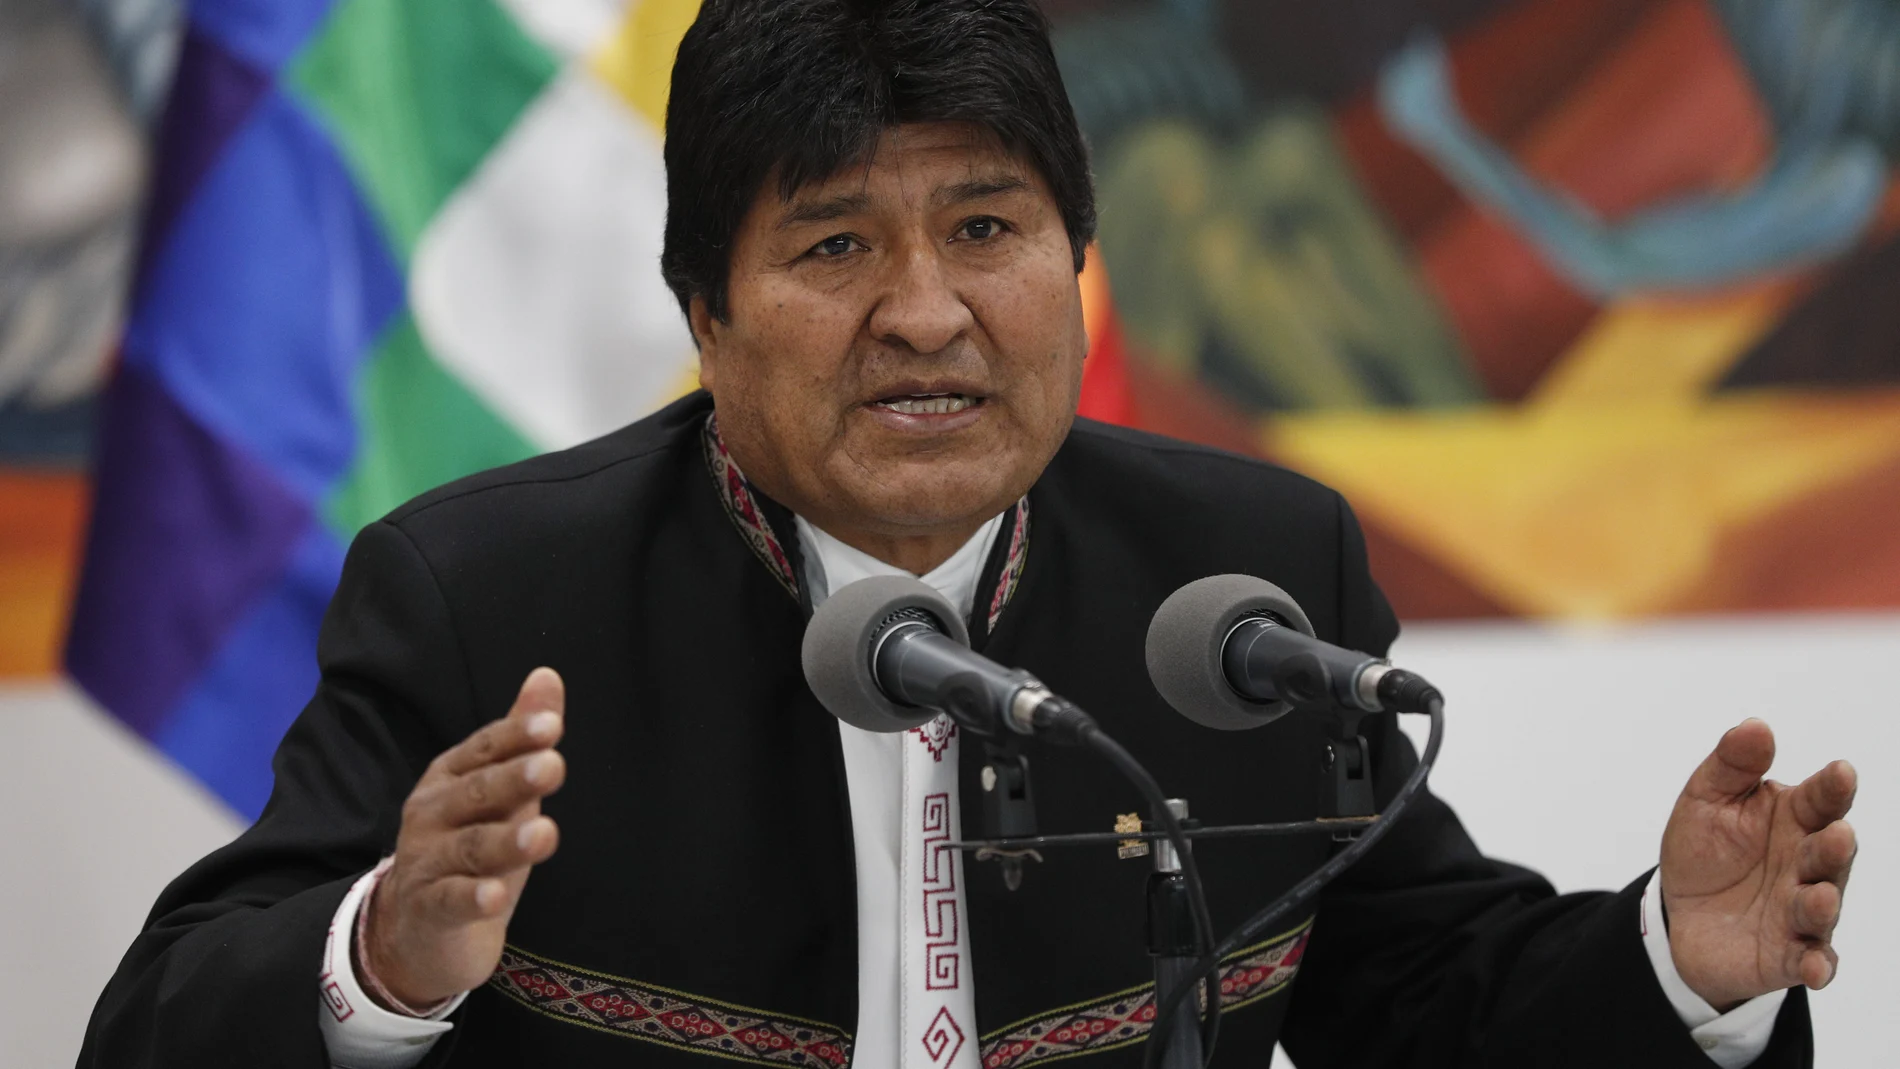 Bolivia's President Evo Morales speaks during a press conference at the presidential palace in La Paz, Bolivia, Wednesday, Oct. 23, 2019. International election monitors expressed concern over Bolivia's presidential election process Tuesday after an oddly delayed official quick count showed President Morales near an outright first-round victory â€” even as a more formal tally tended to show him heading for a risky runoff. (AP Photo/Juan Karita)